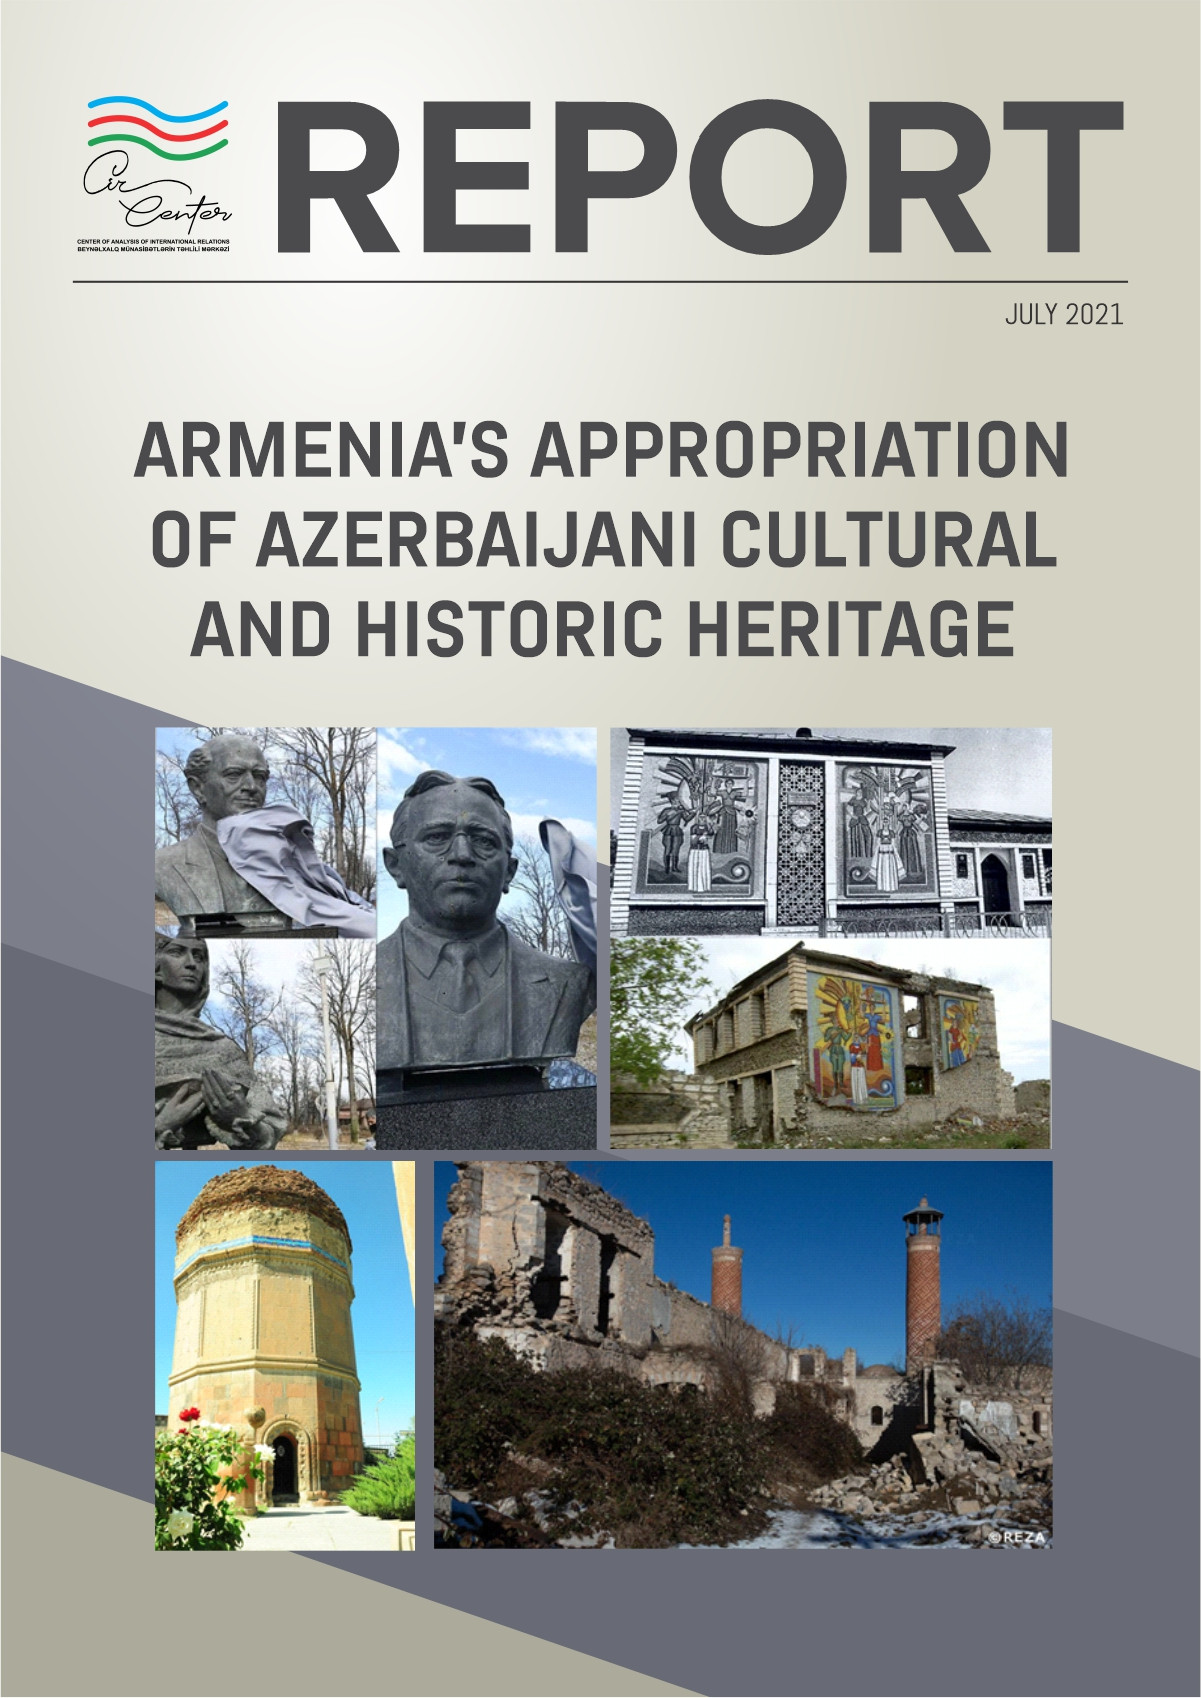 ARMENIA’S APPROPRIATION OF AZERBAIJANI CULTURAL AND HISTORIC HERITAGE